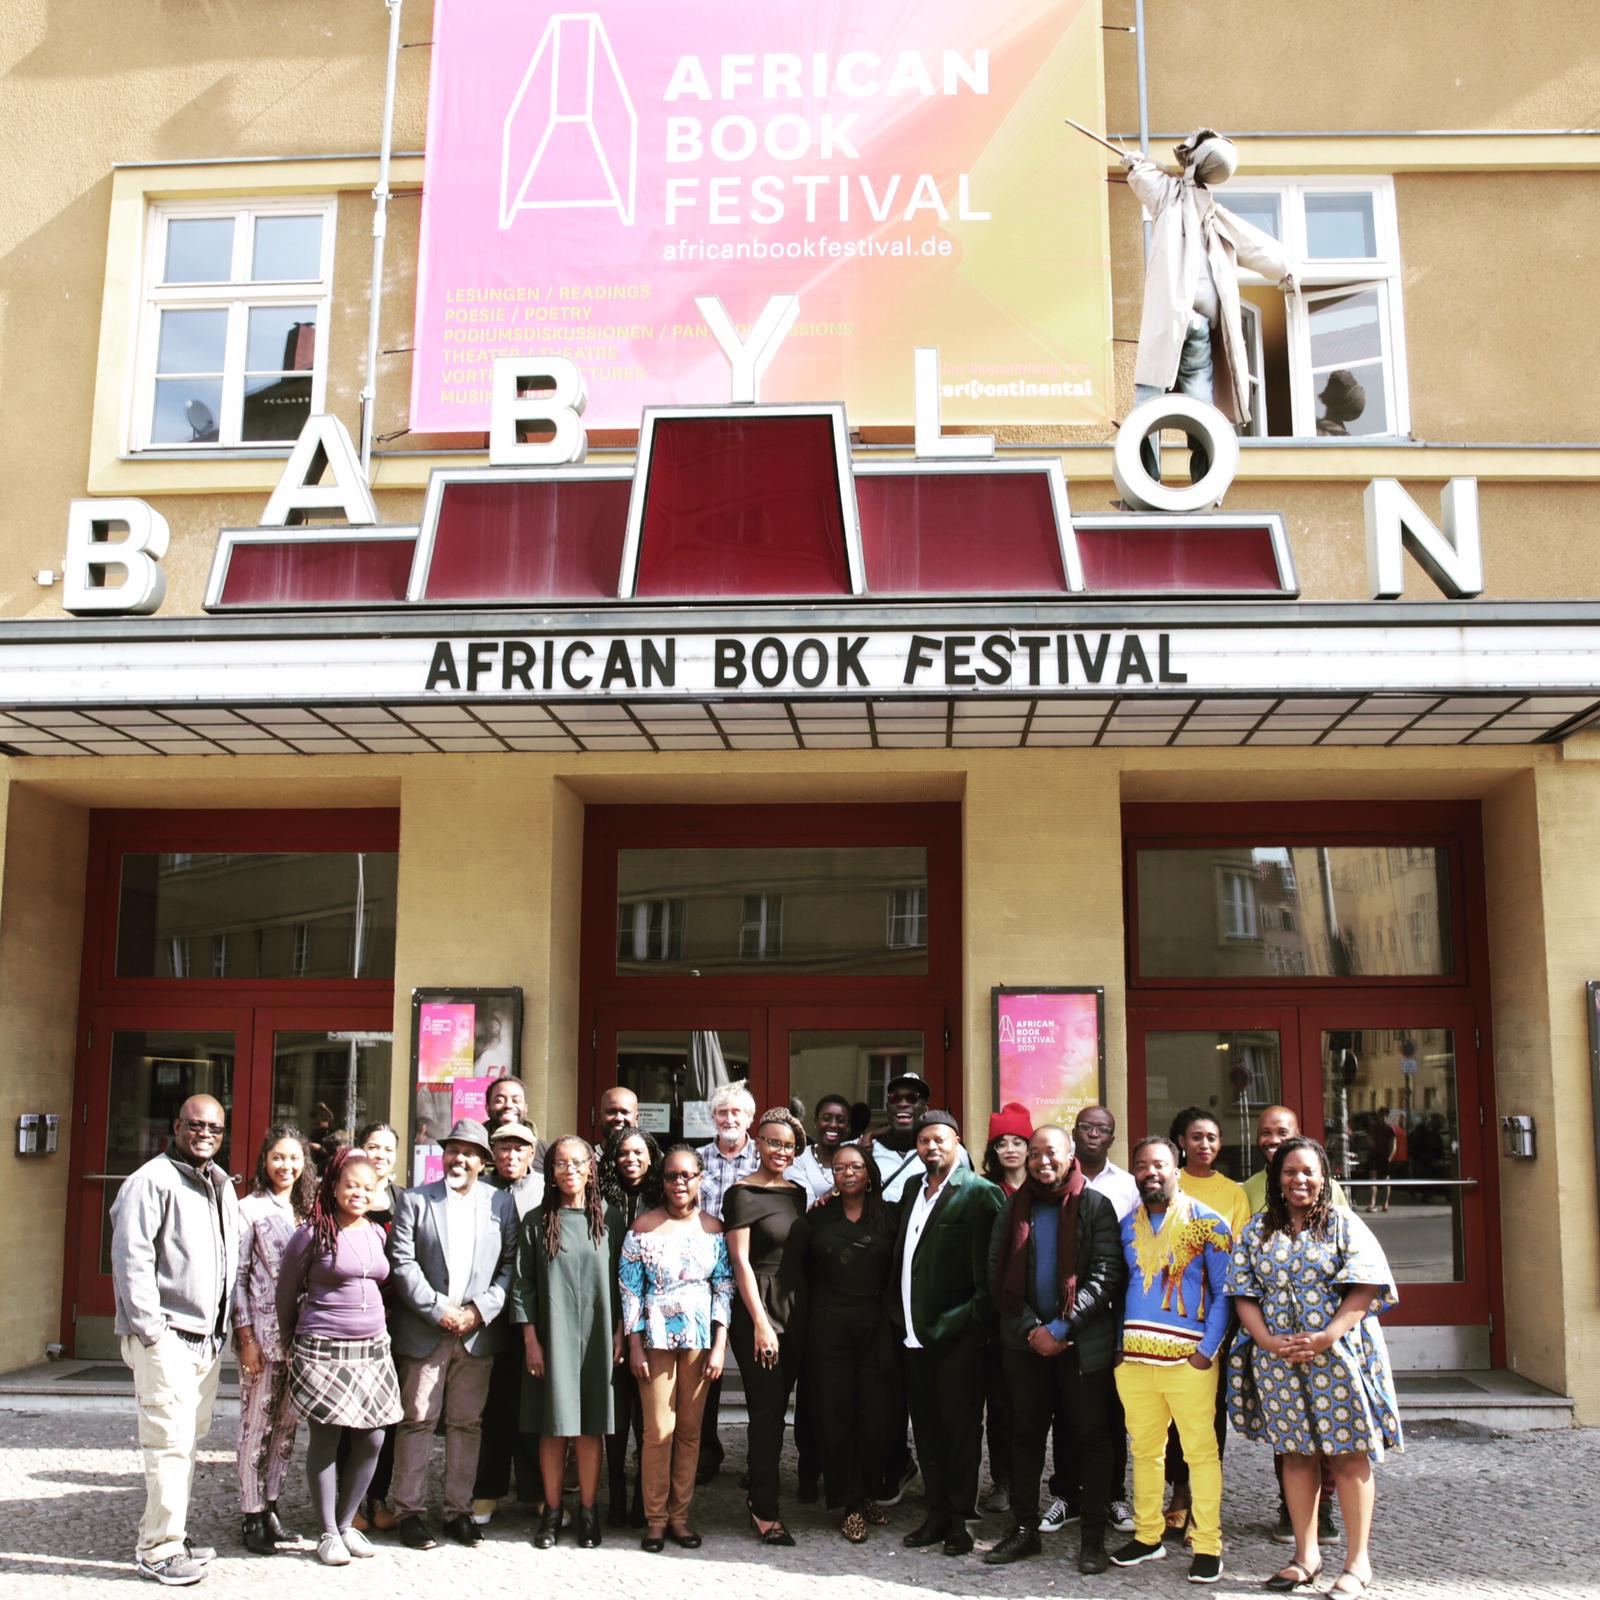 A snapshot of the African Book Festival 2019 in Berlin, Germany.